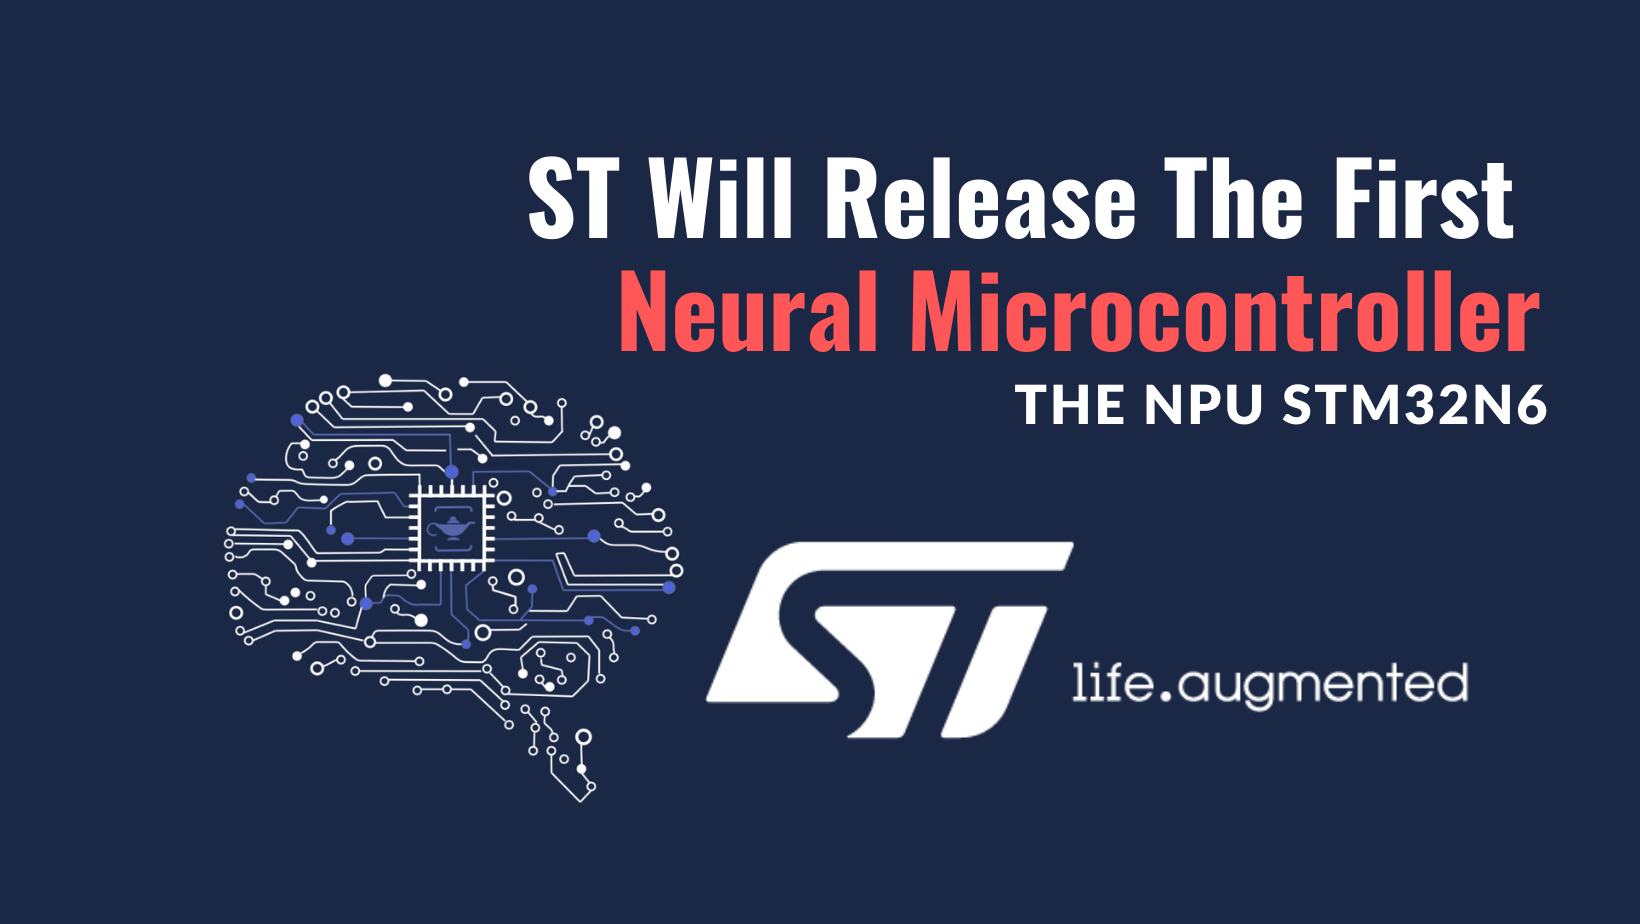 ST will release the first neural microcontroller the NPU STM32N6